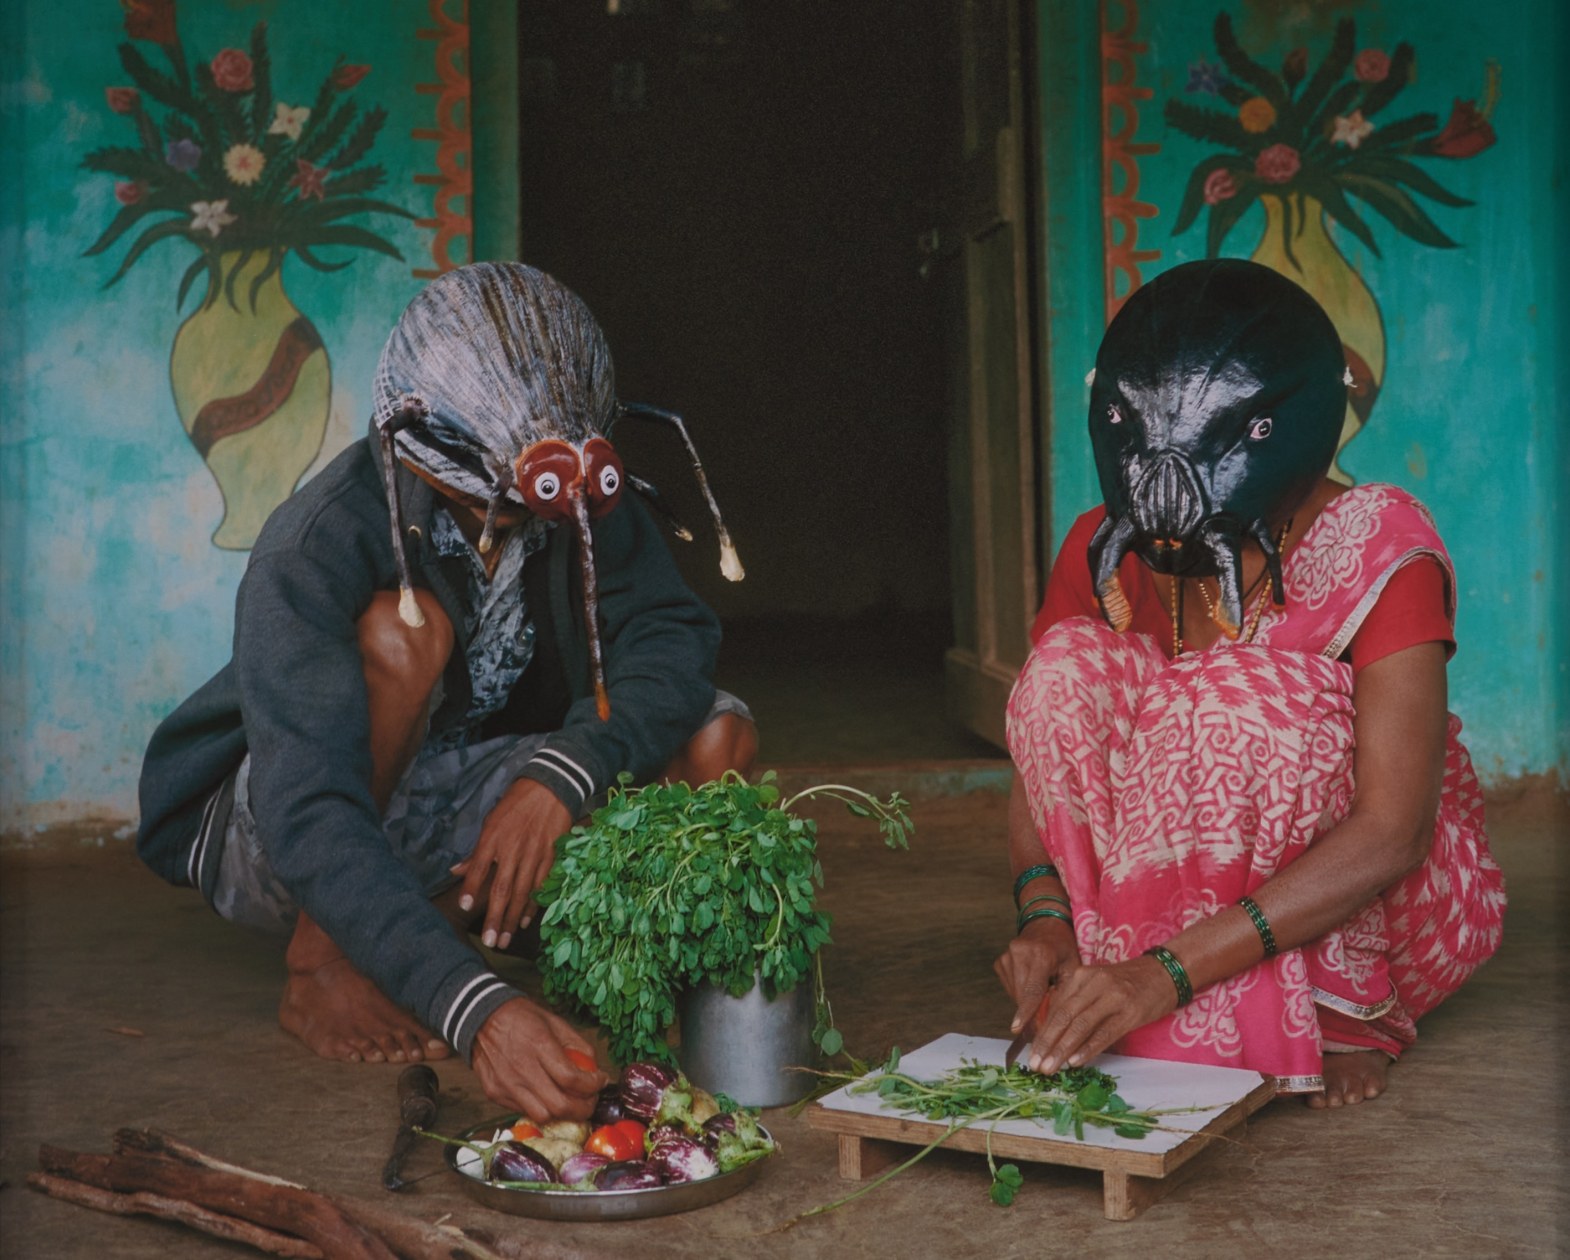 Gauri Gill, Untitled (74) from Acts of Appearance